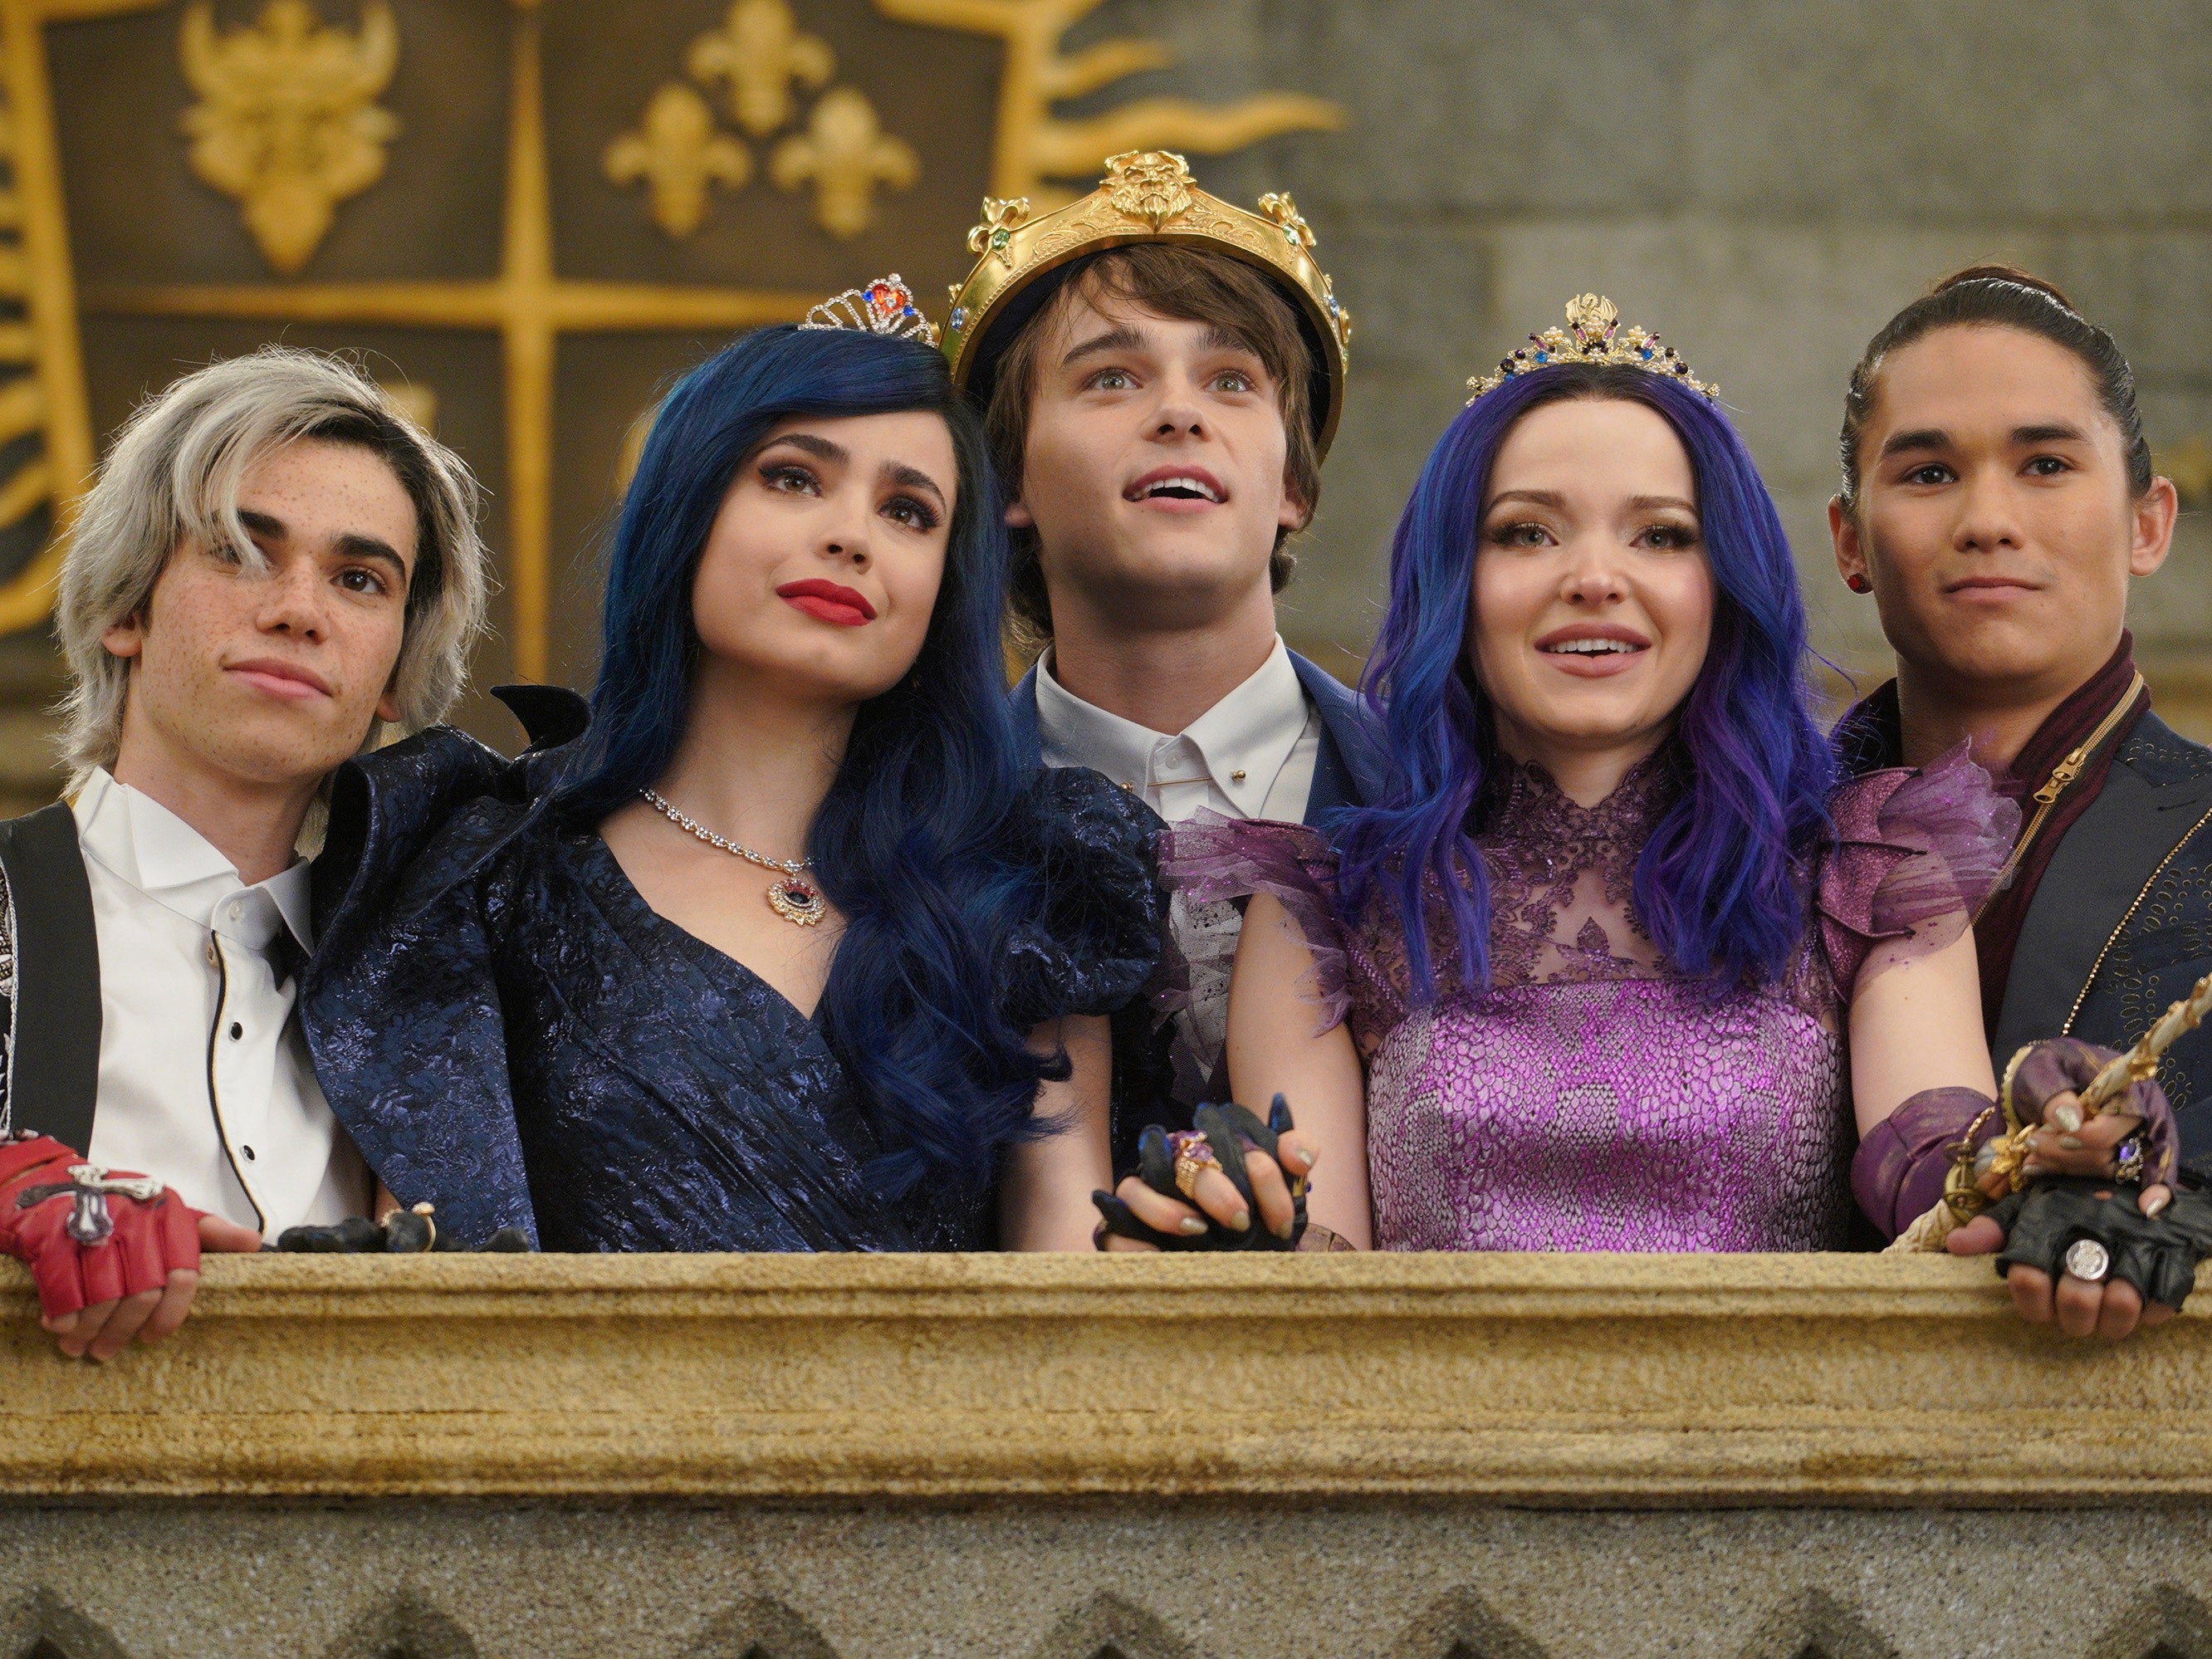 Dove Cameron, Sofia Carson, and More Descendants 3 Stars Say Goodbye to Their Characters